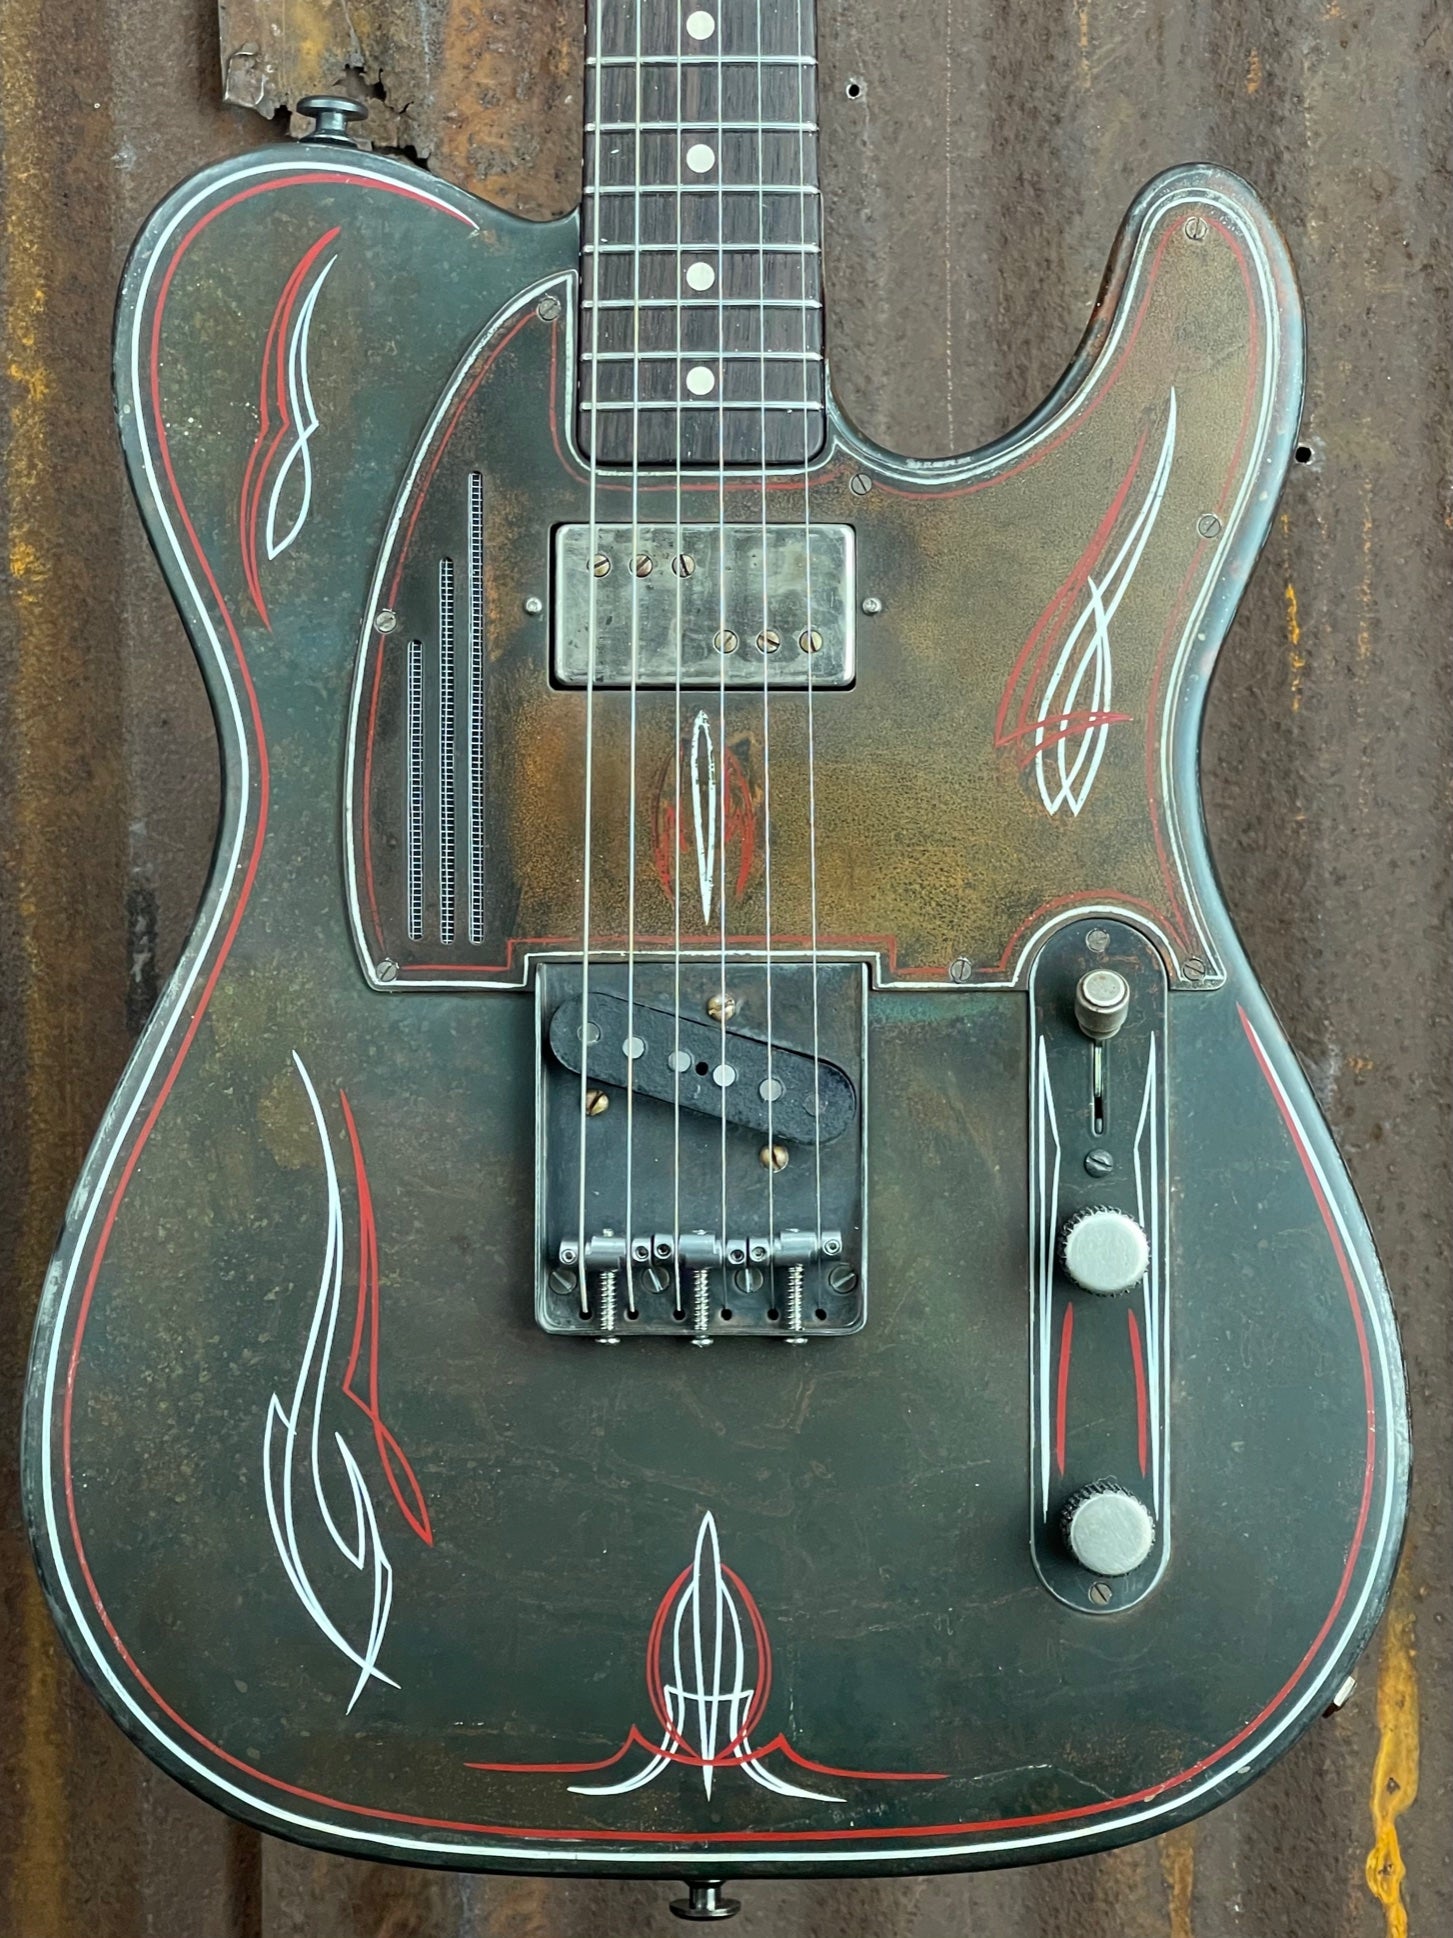 21120 Rust O Matic Pinstriped SteelCaster